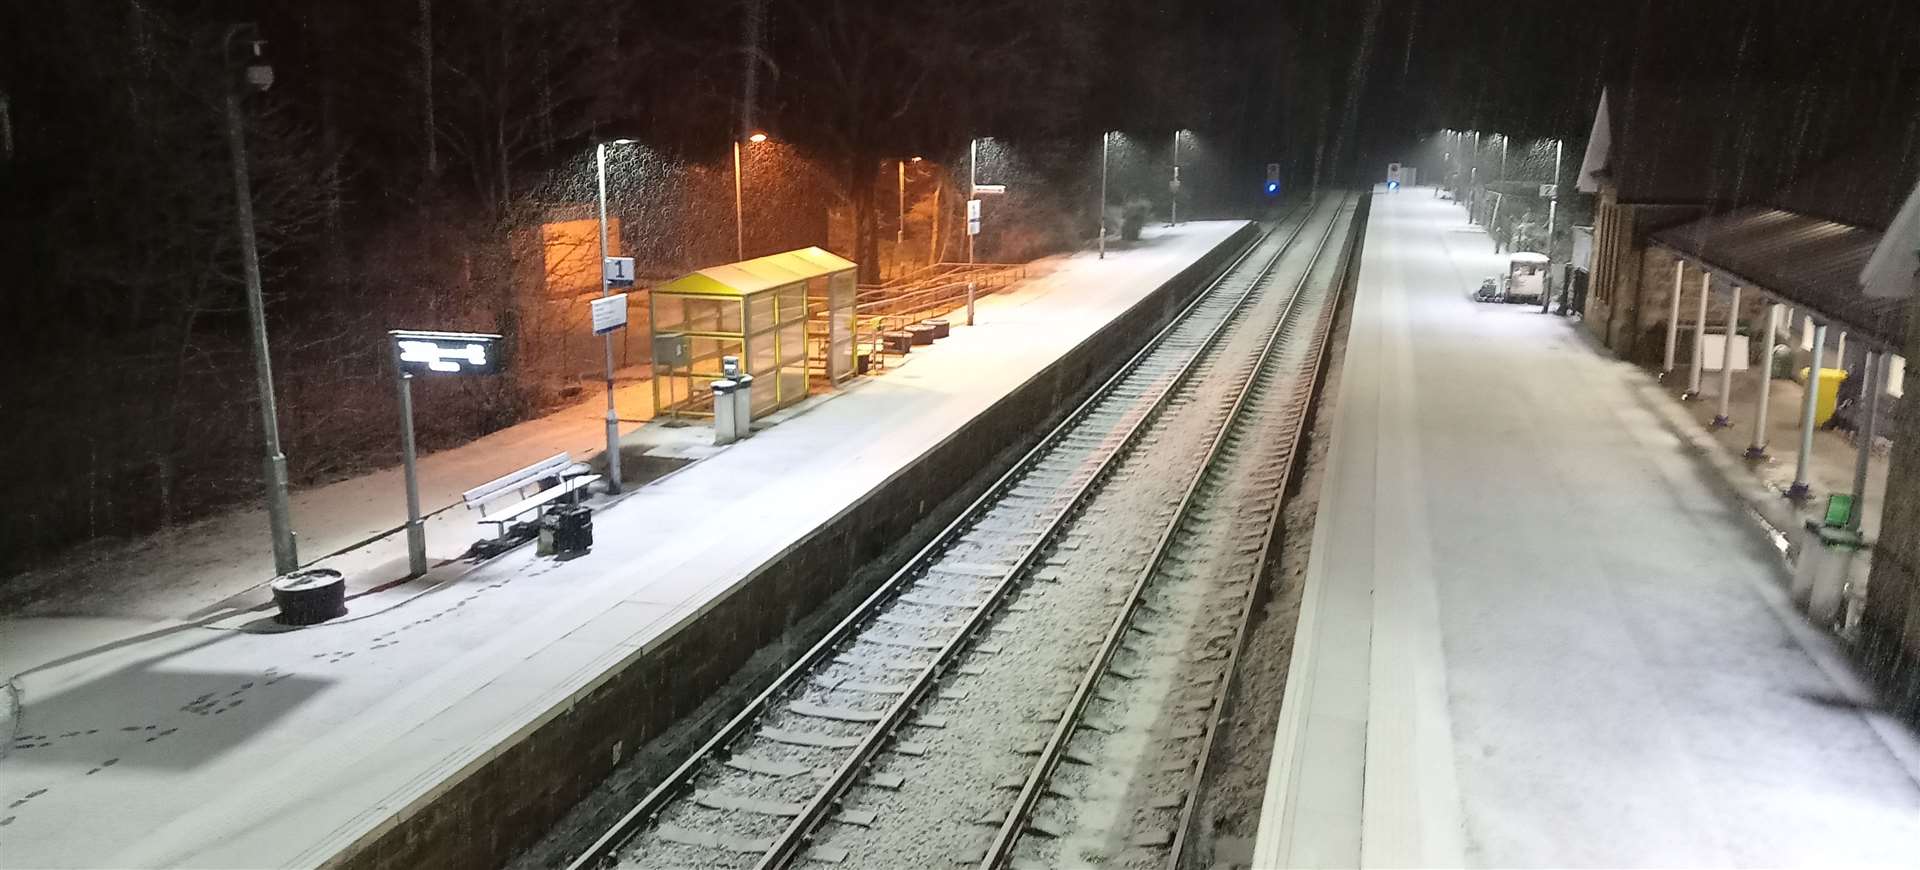 Snow has caused interruptions on several rail routes this week.